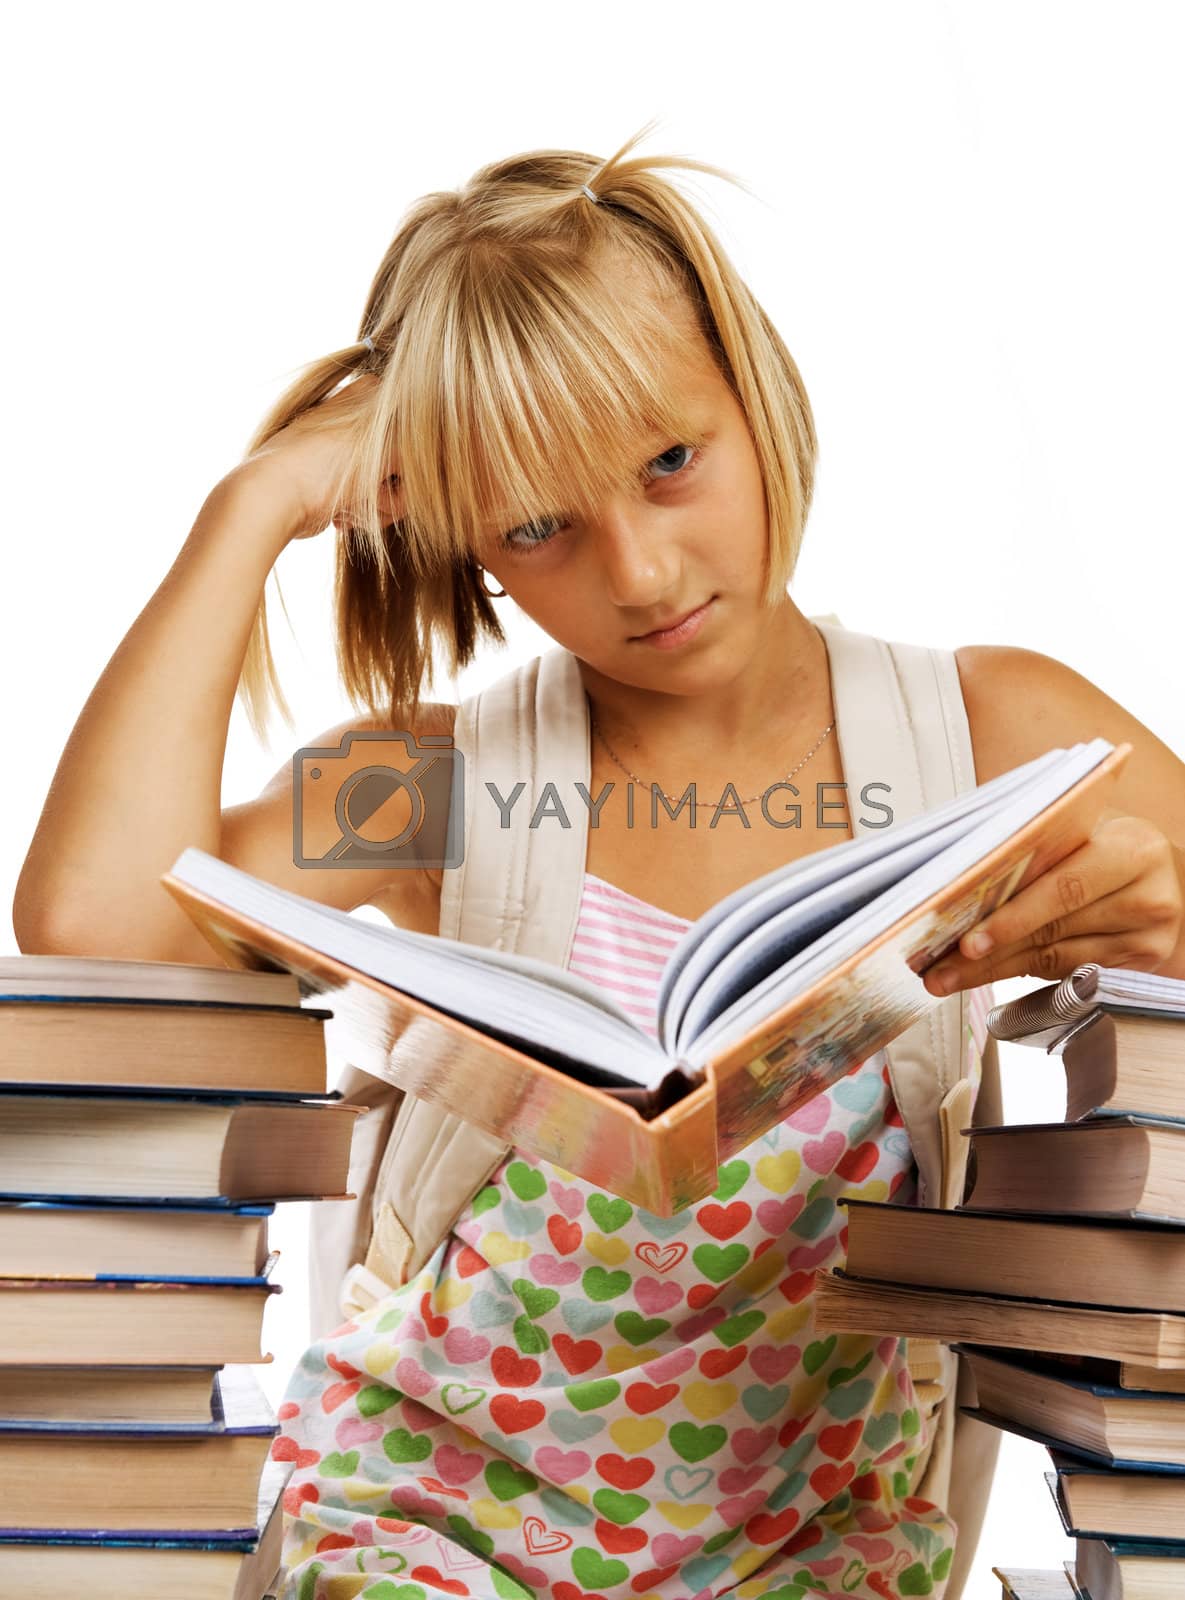 Royalty free image of Back To School. Tired School Girl by SubbotinaA